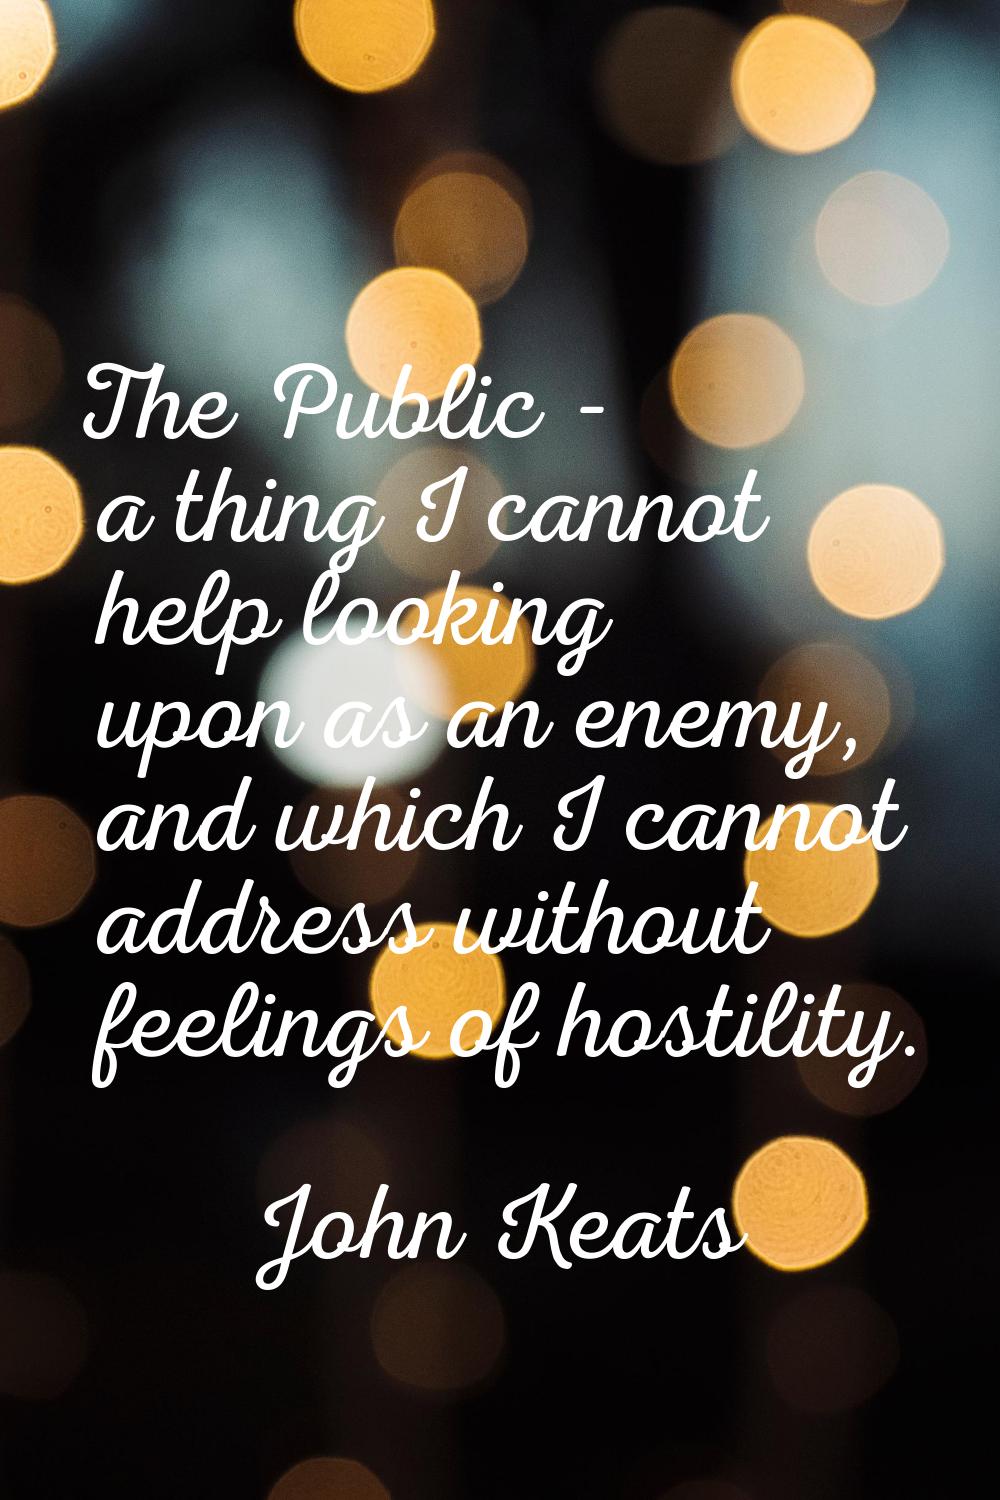 The Public - a thing I cannot help looking upon as an enemy, and which I cannot address without fee